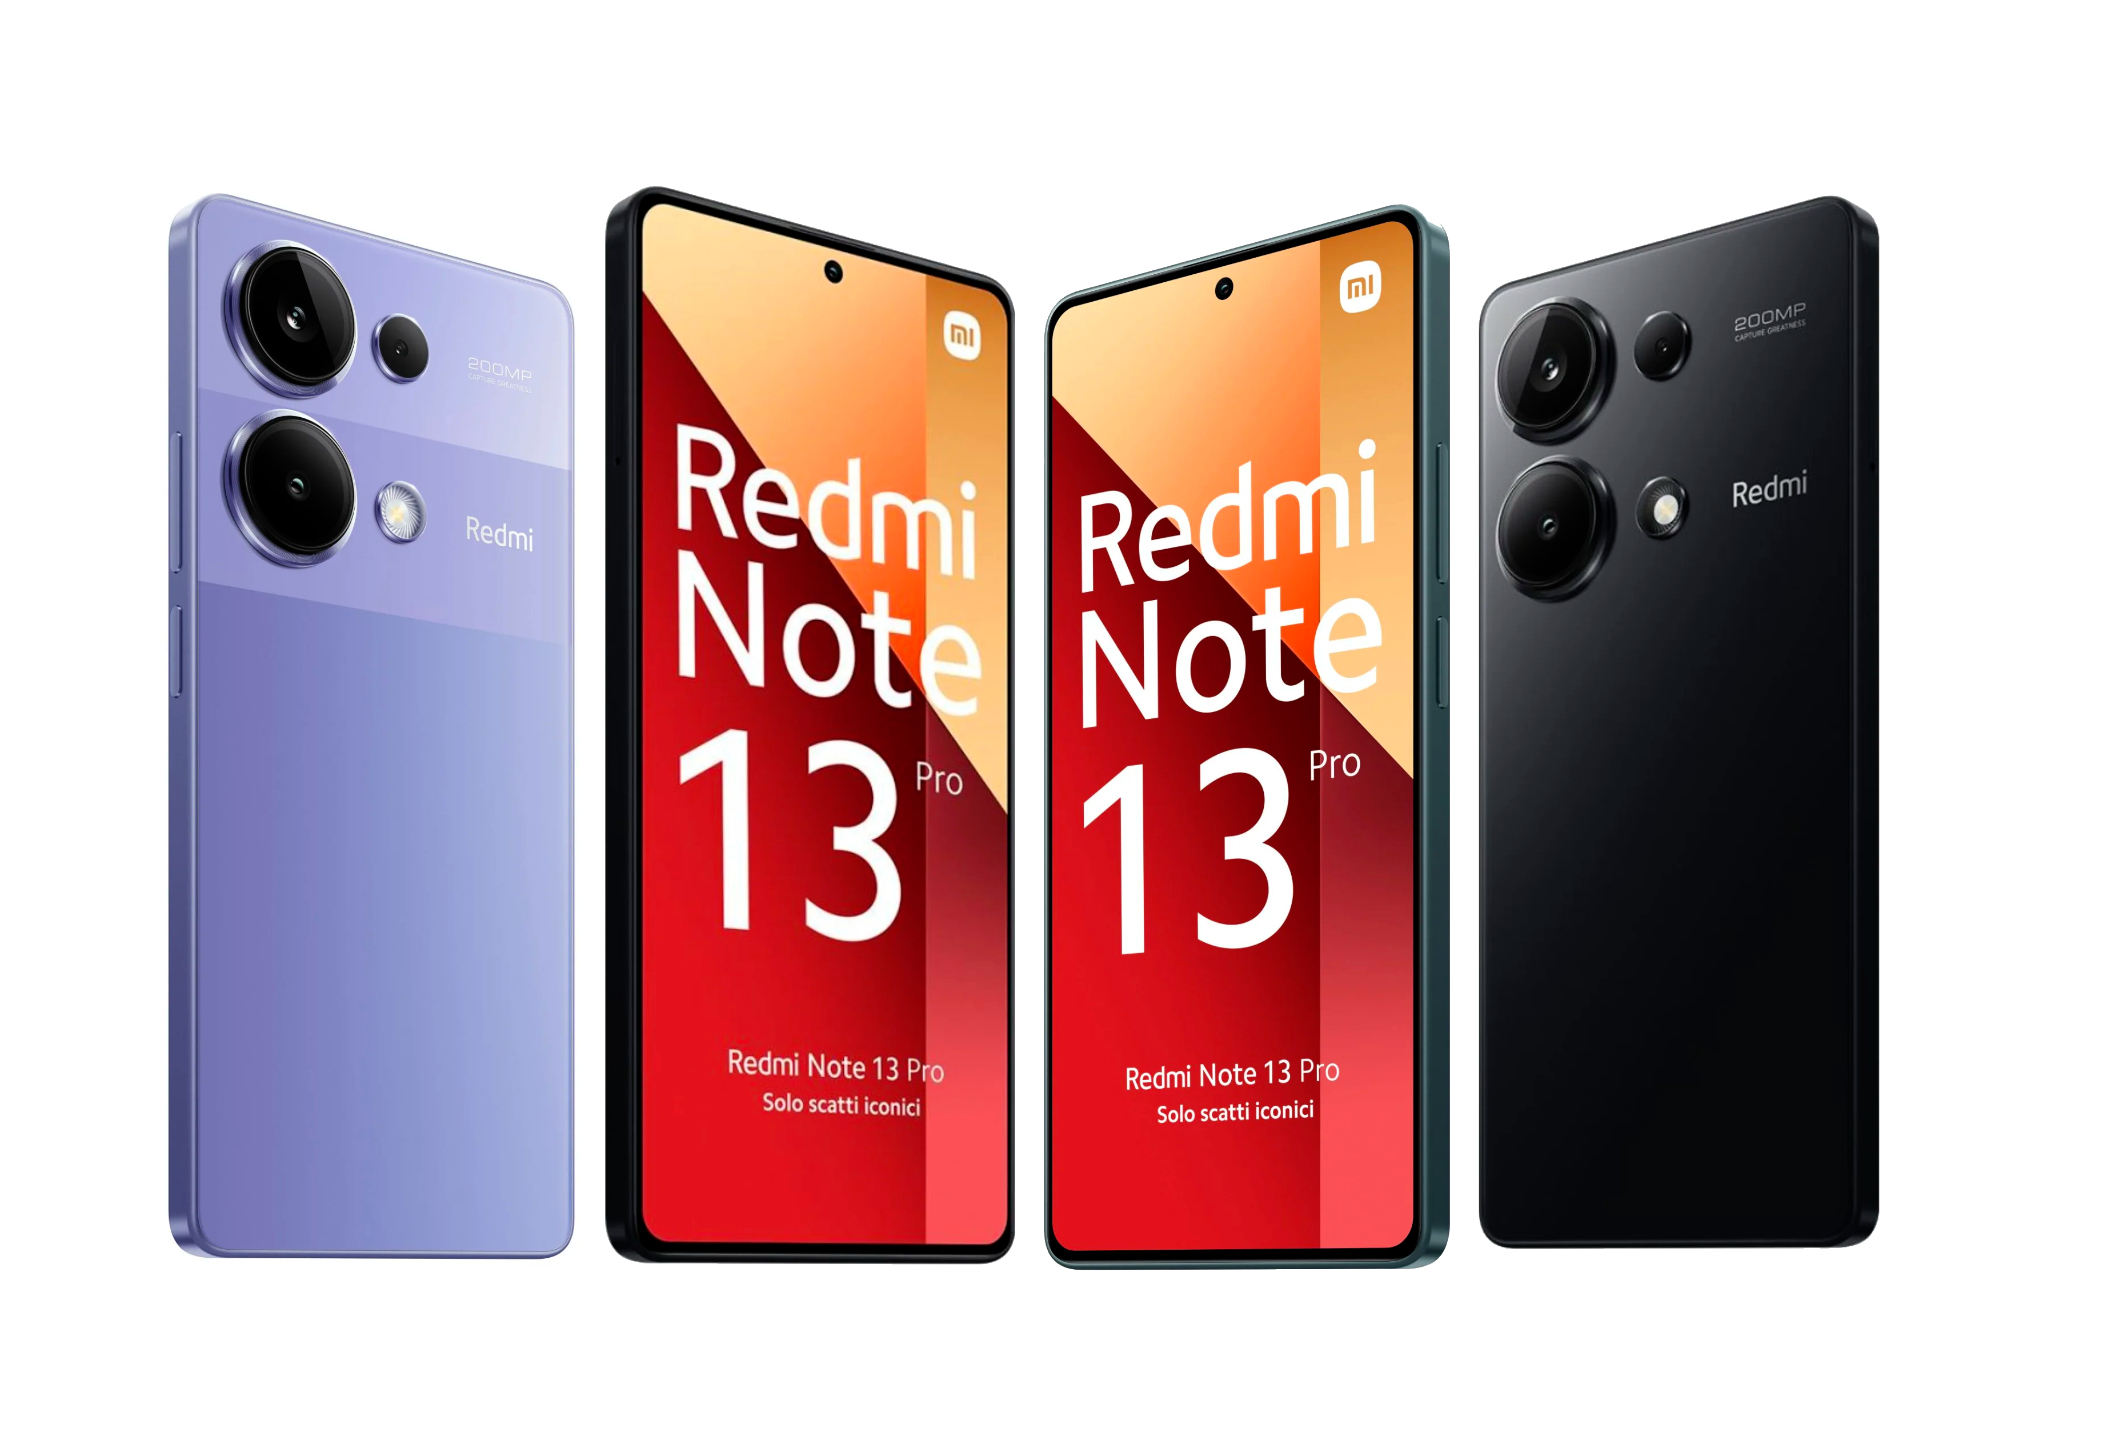 Xiaomi Redmi Note 13 Pro+: Full Specifications, features & pricing